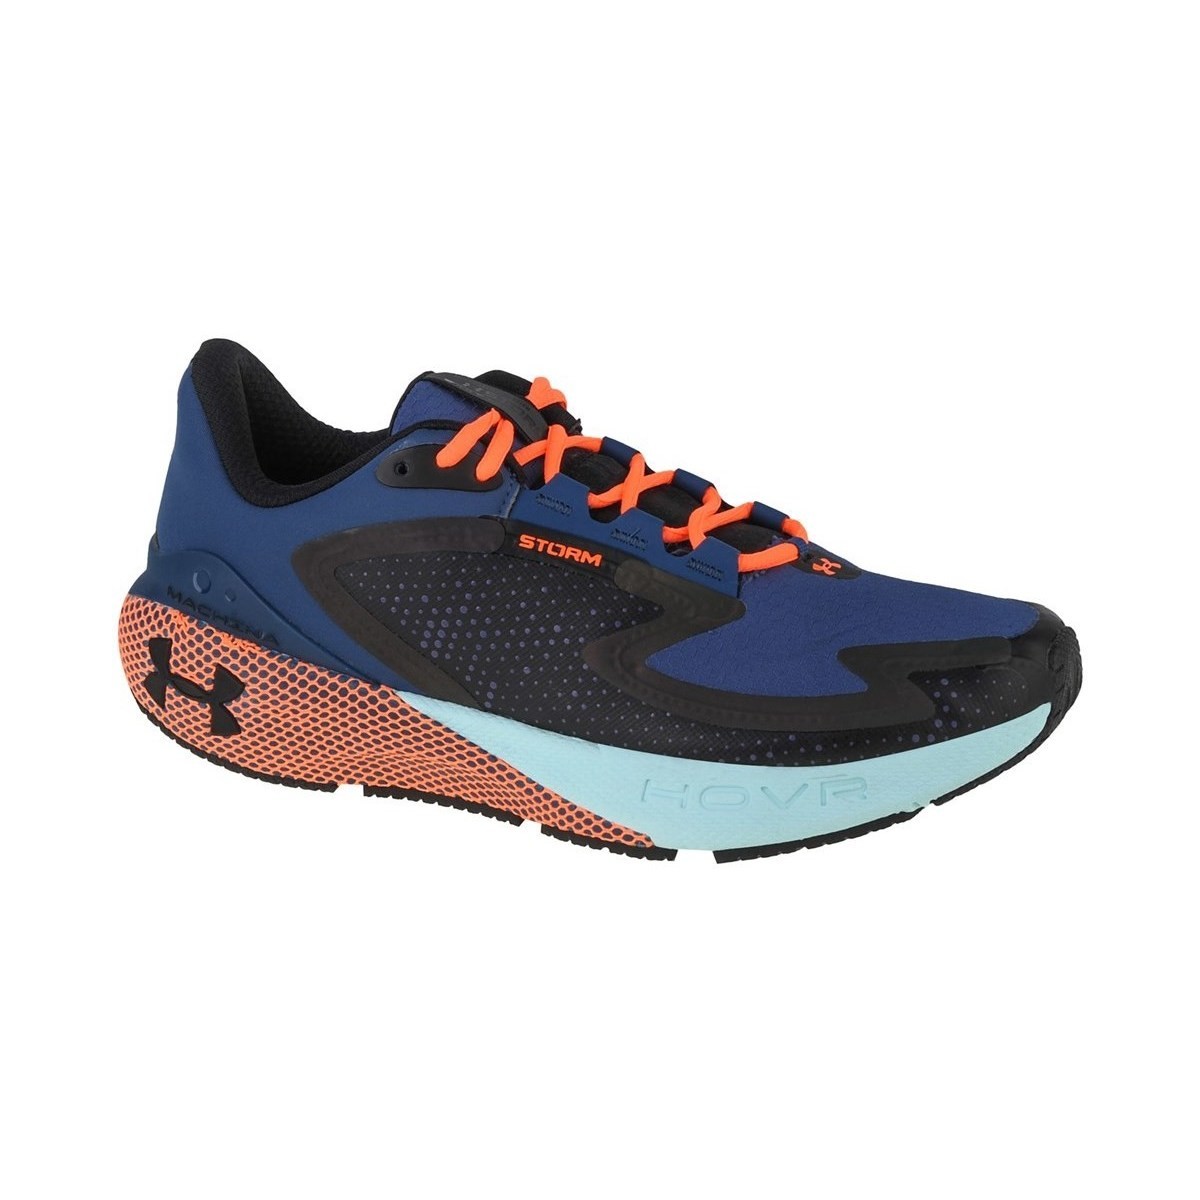 Shoes Men Running shoes Under Armour Hovr Machina 3 Storm Navy blue, Black